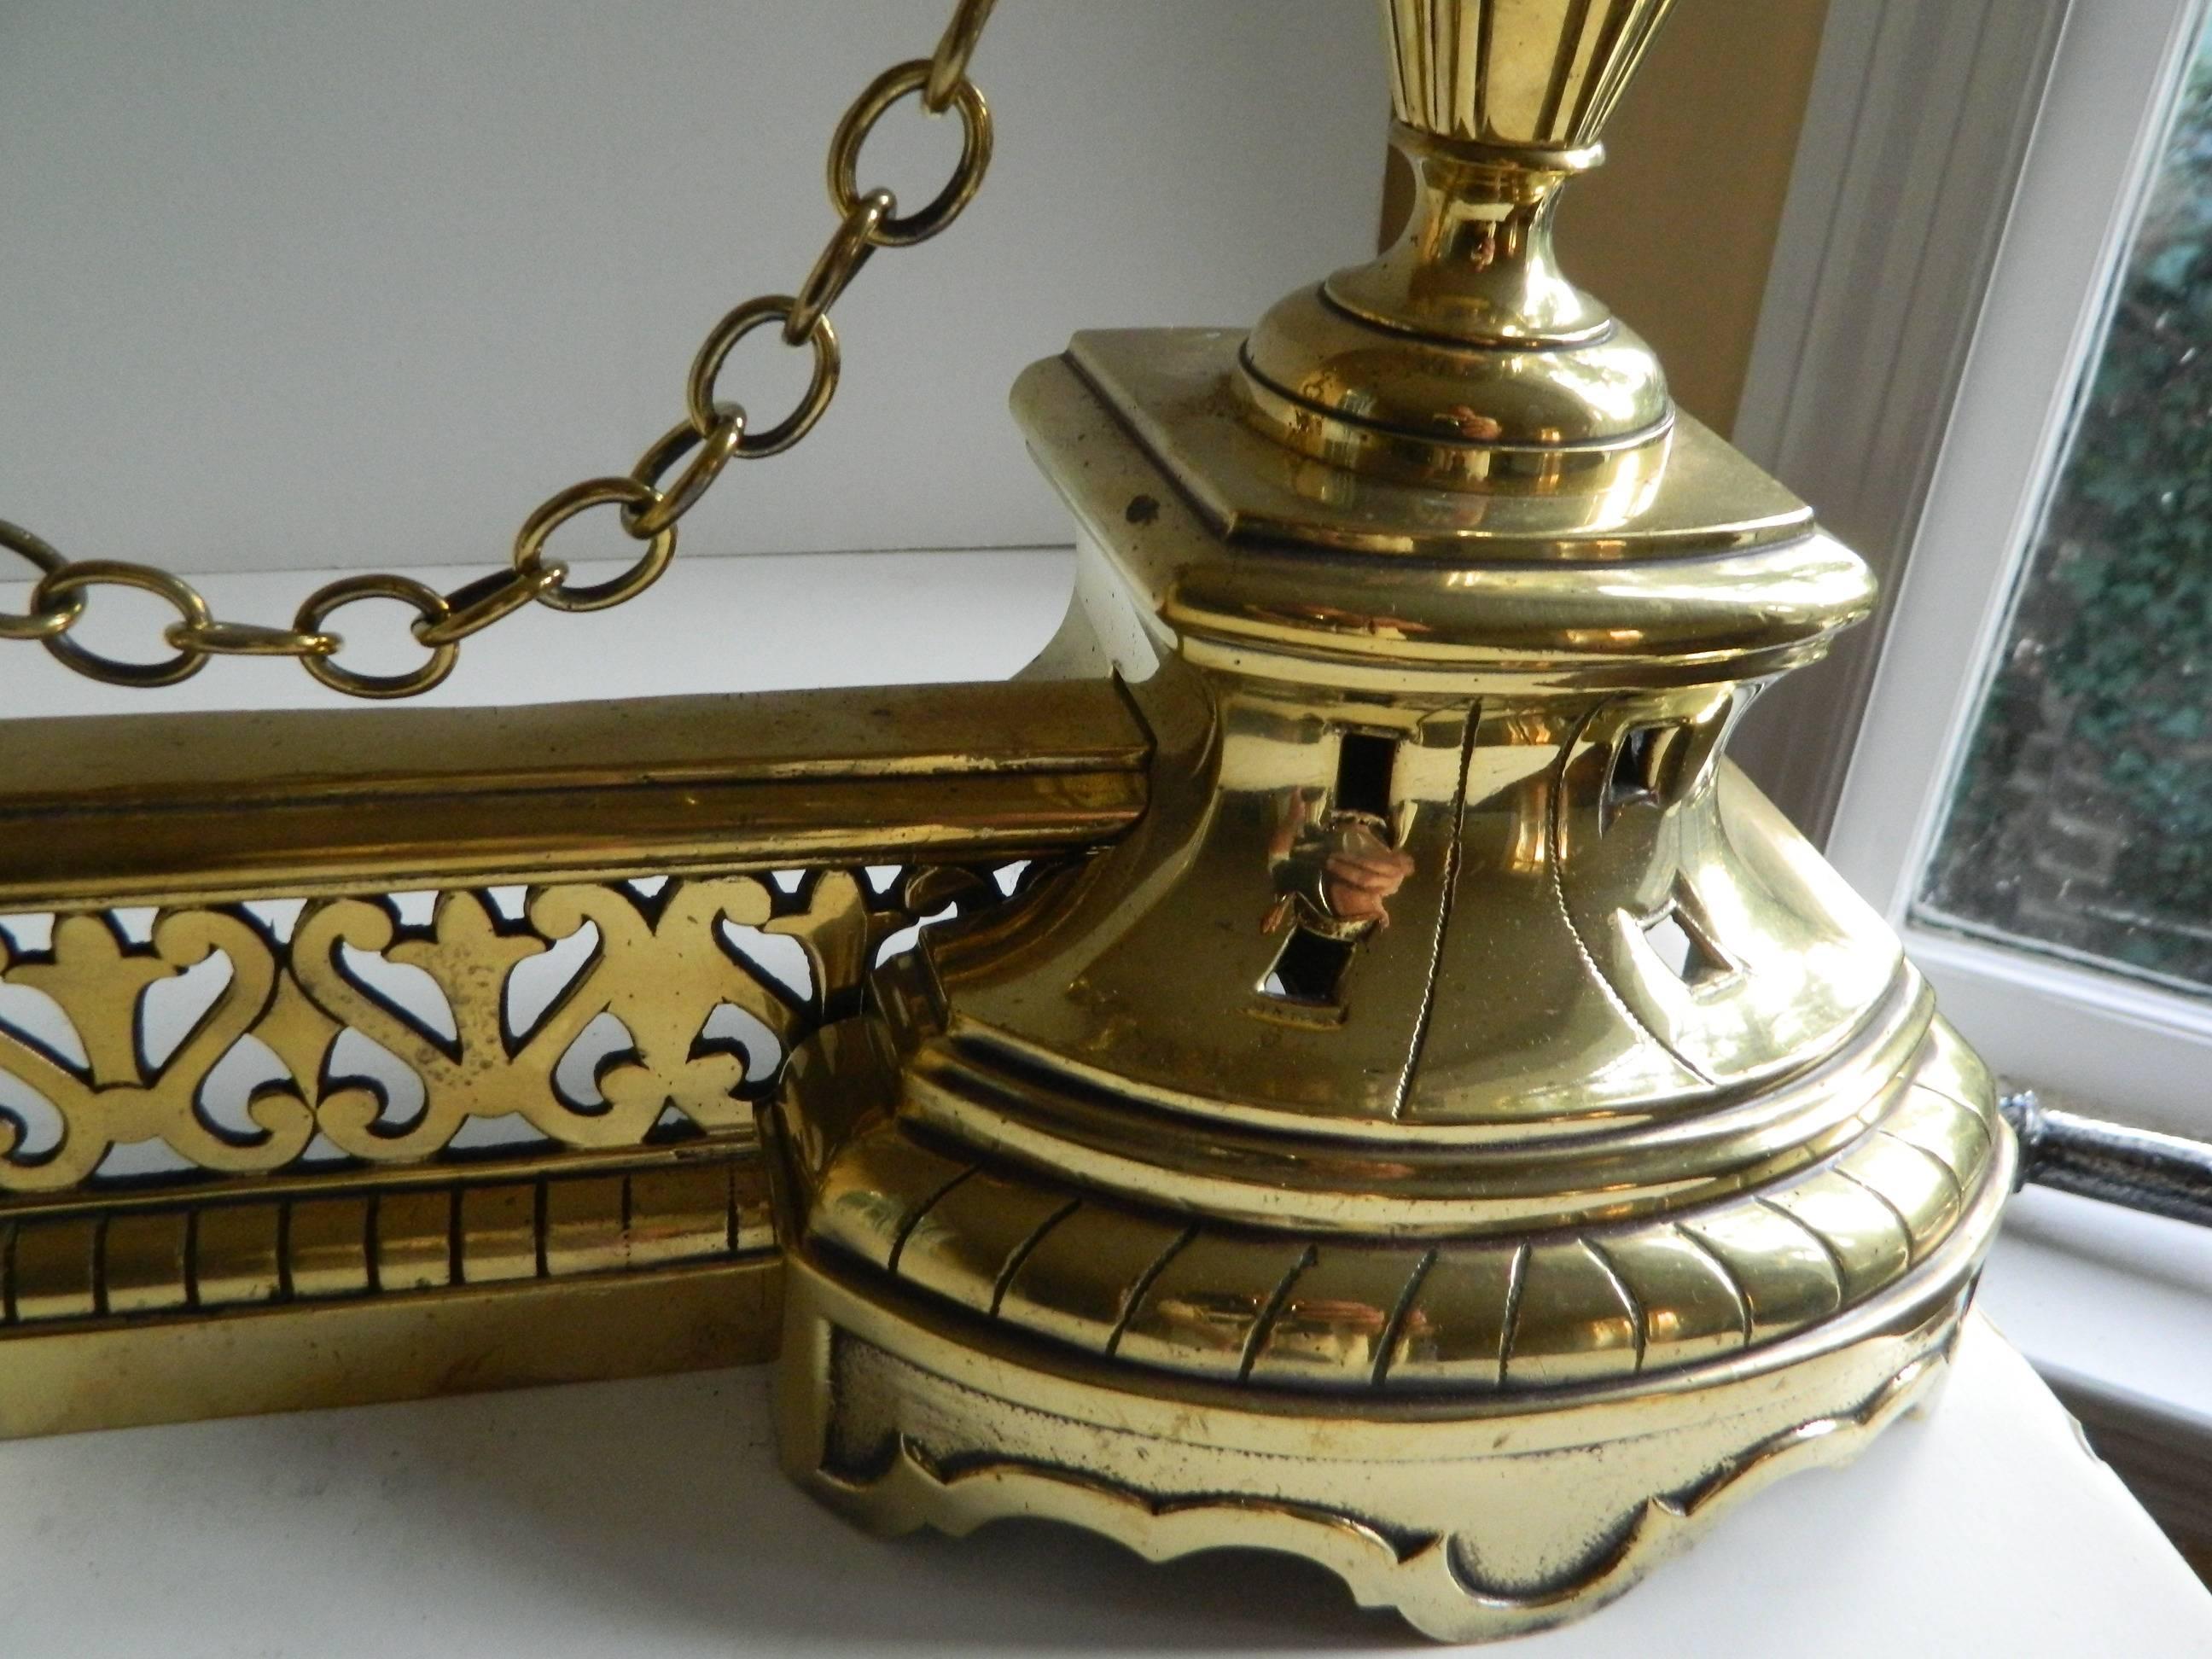 19th Century Pair of Polished Brass Chenets or Andirons with a Fender, Large and Small Urns For Sale